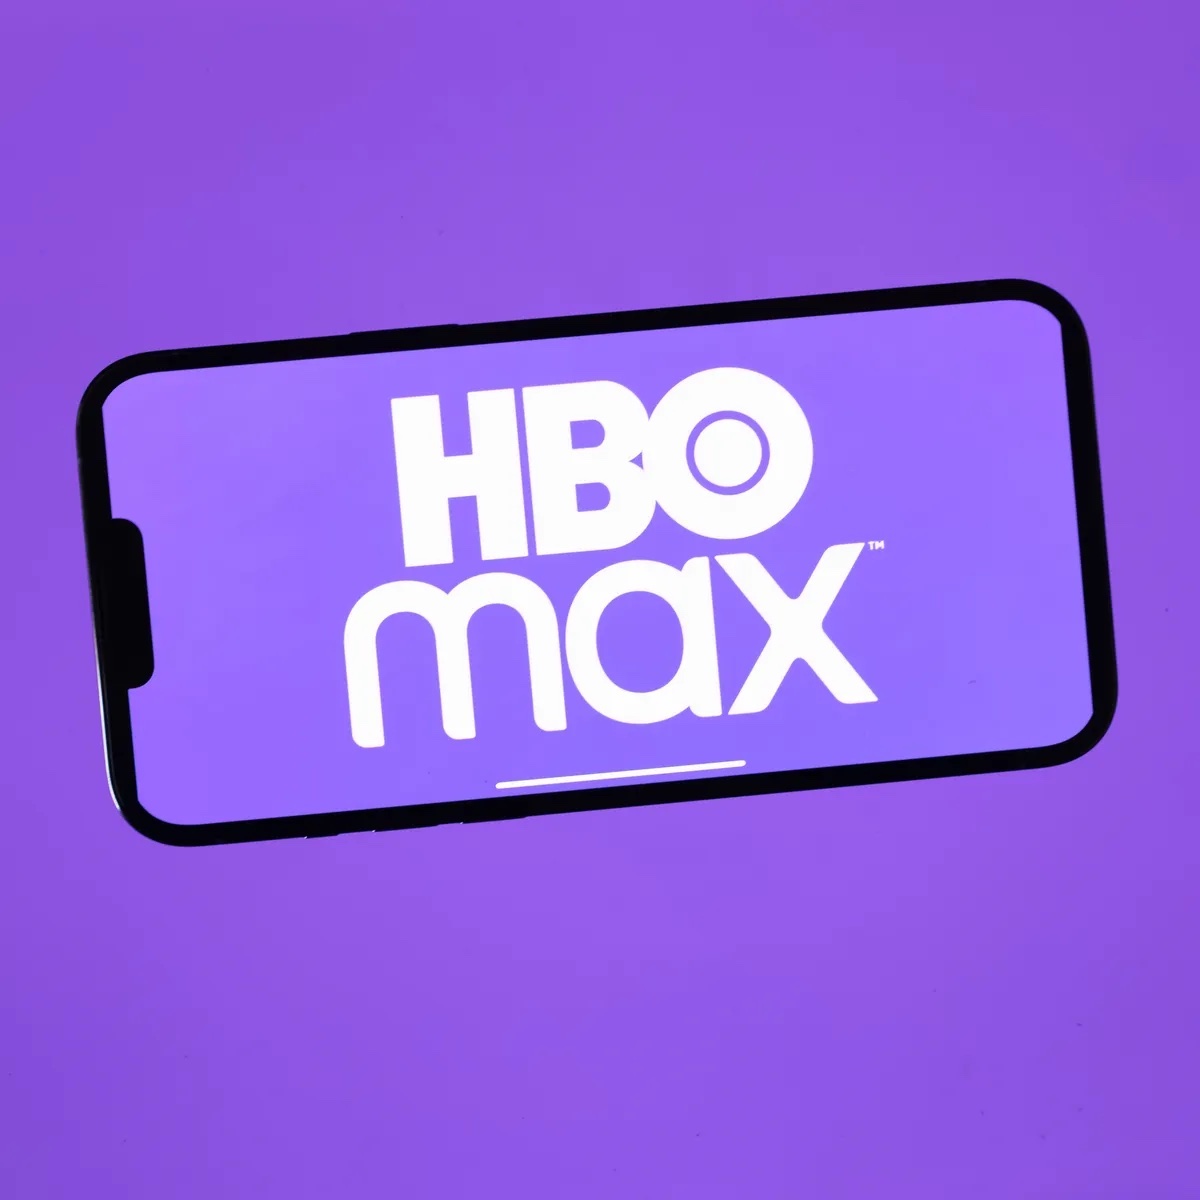 Struggling to find good shows to watch on streaming services? Here are the best shows on HBO Max now.